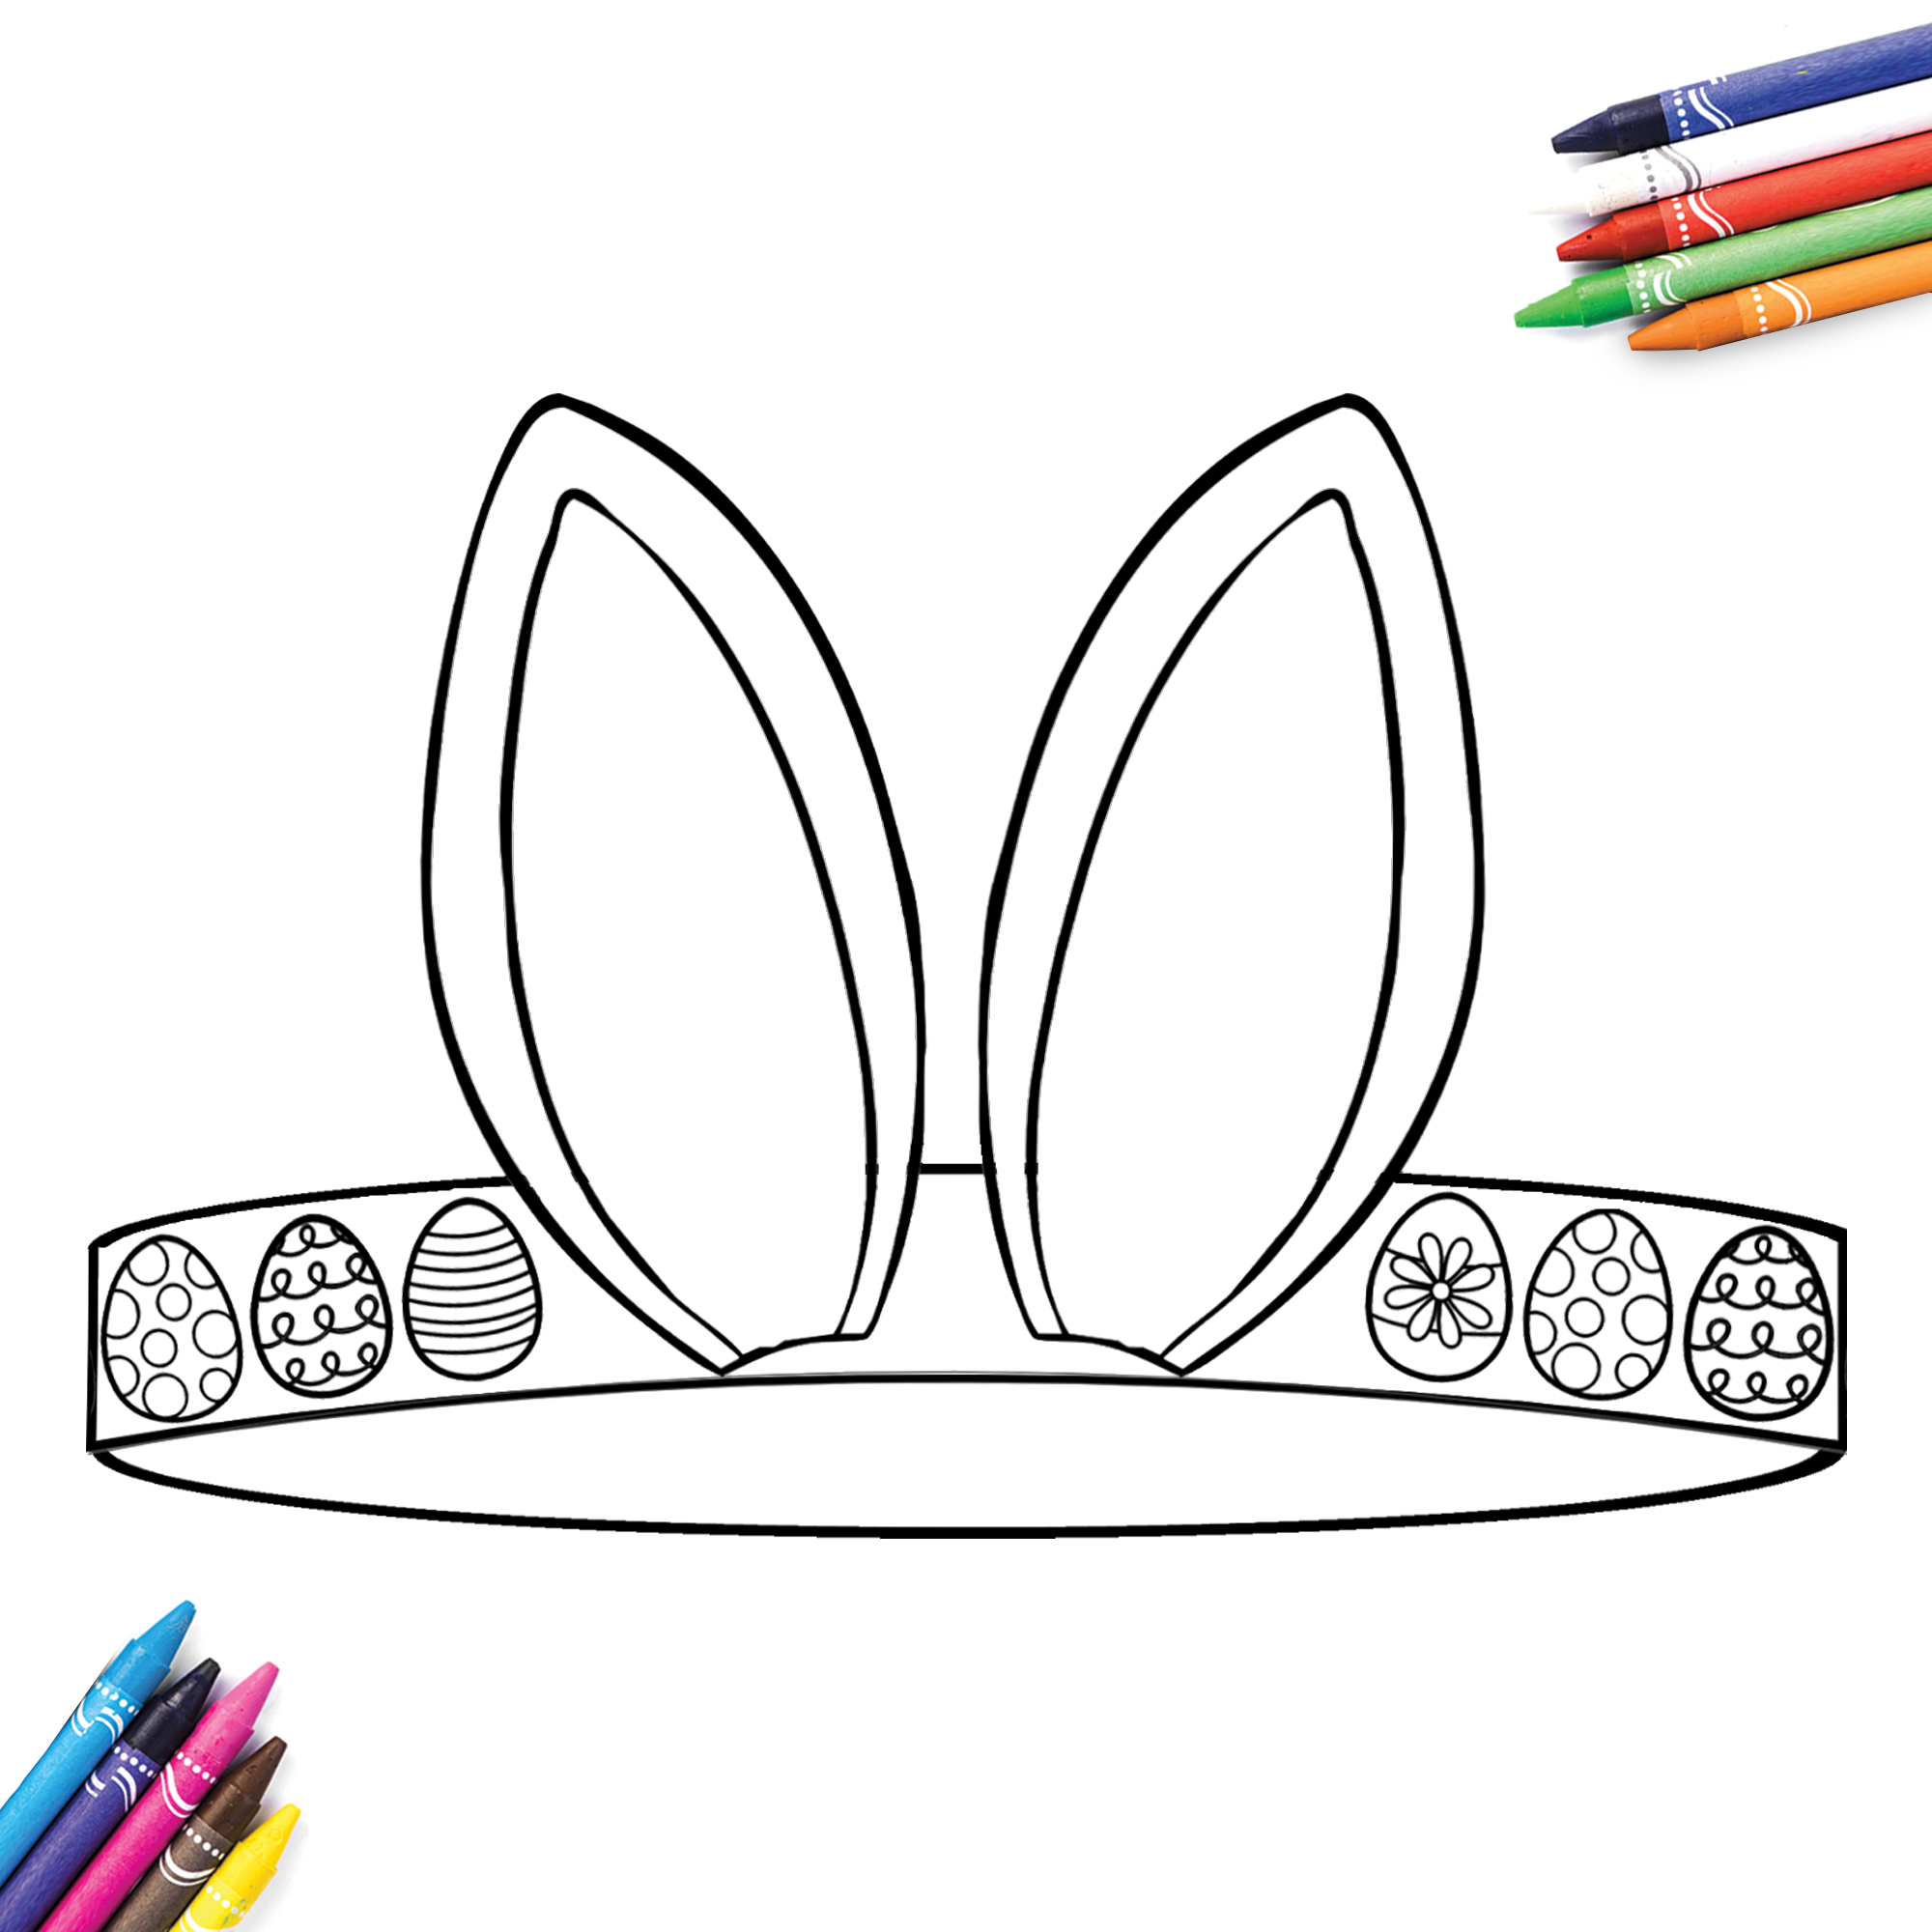 Easter Bunny Coloring Crowns (12 Crowns)